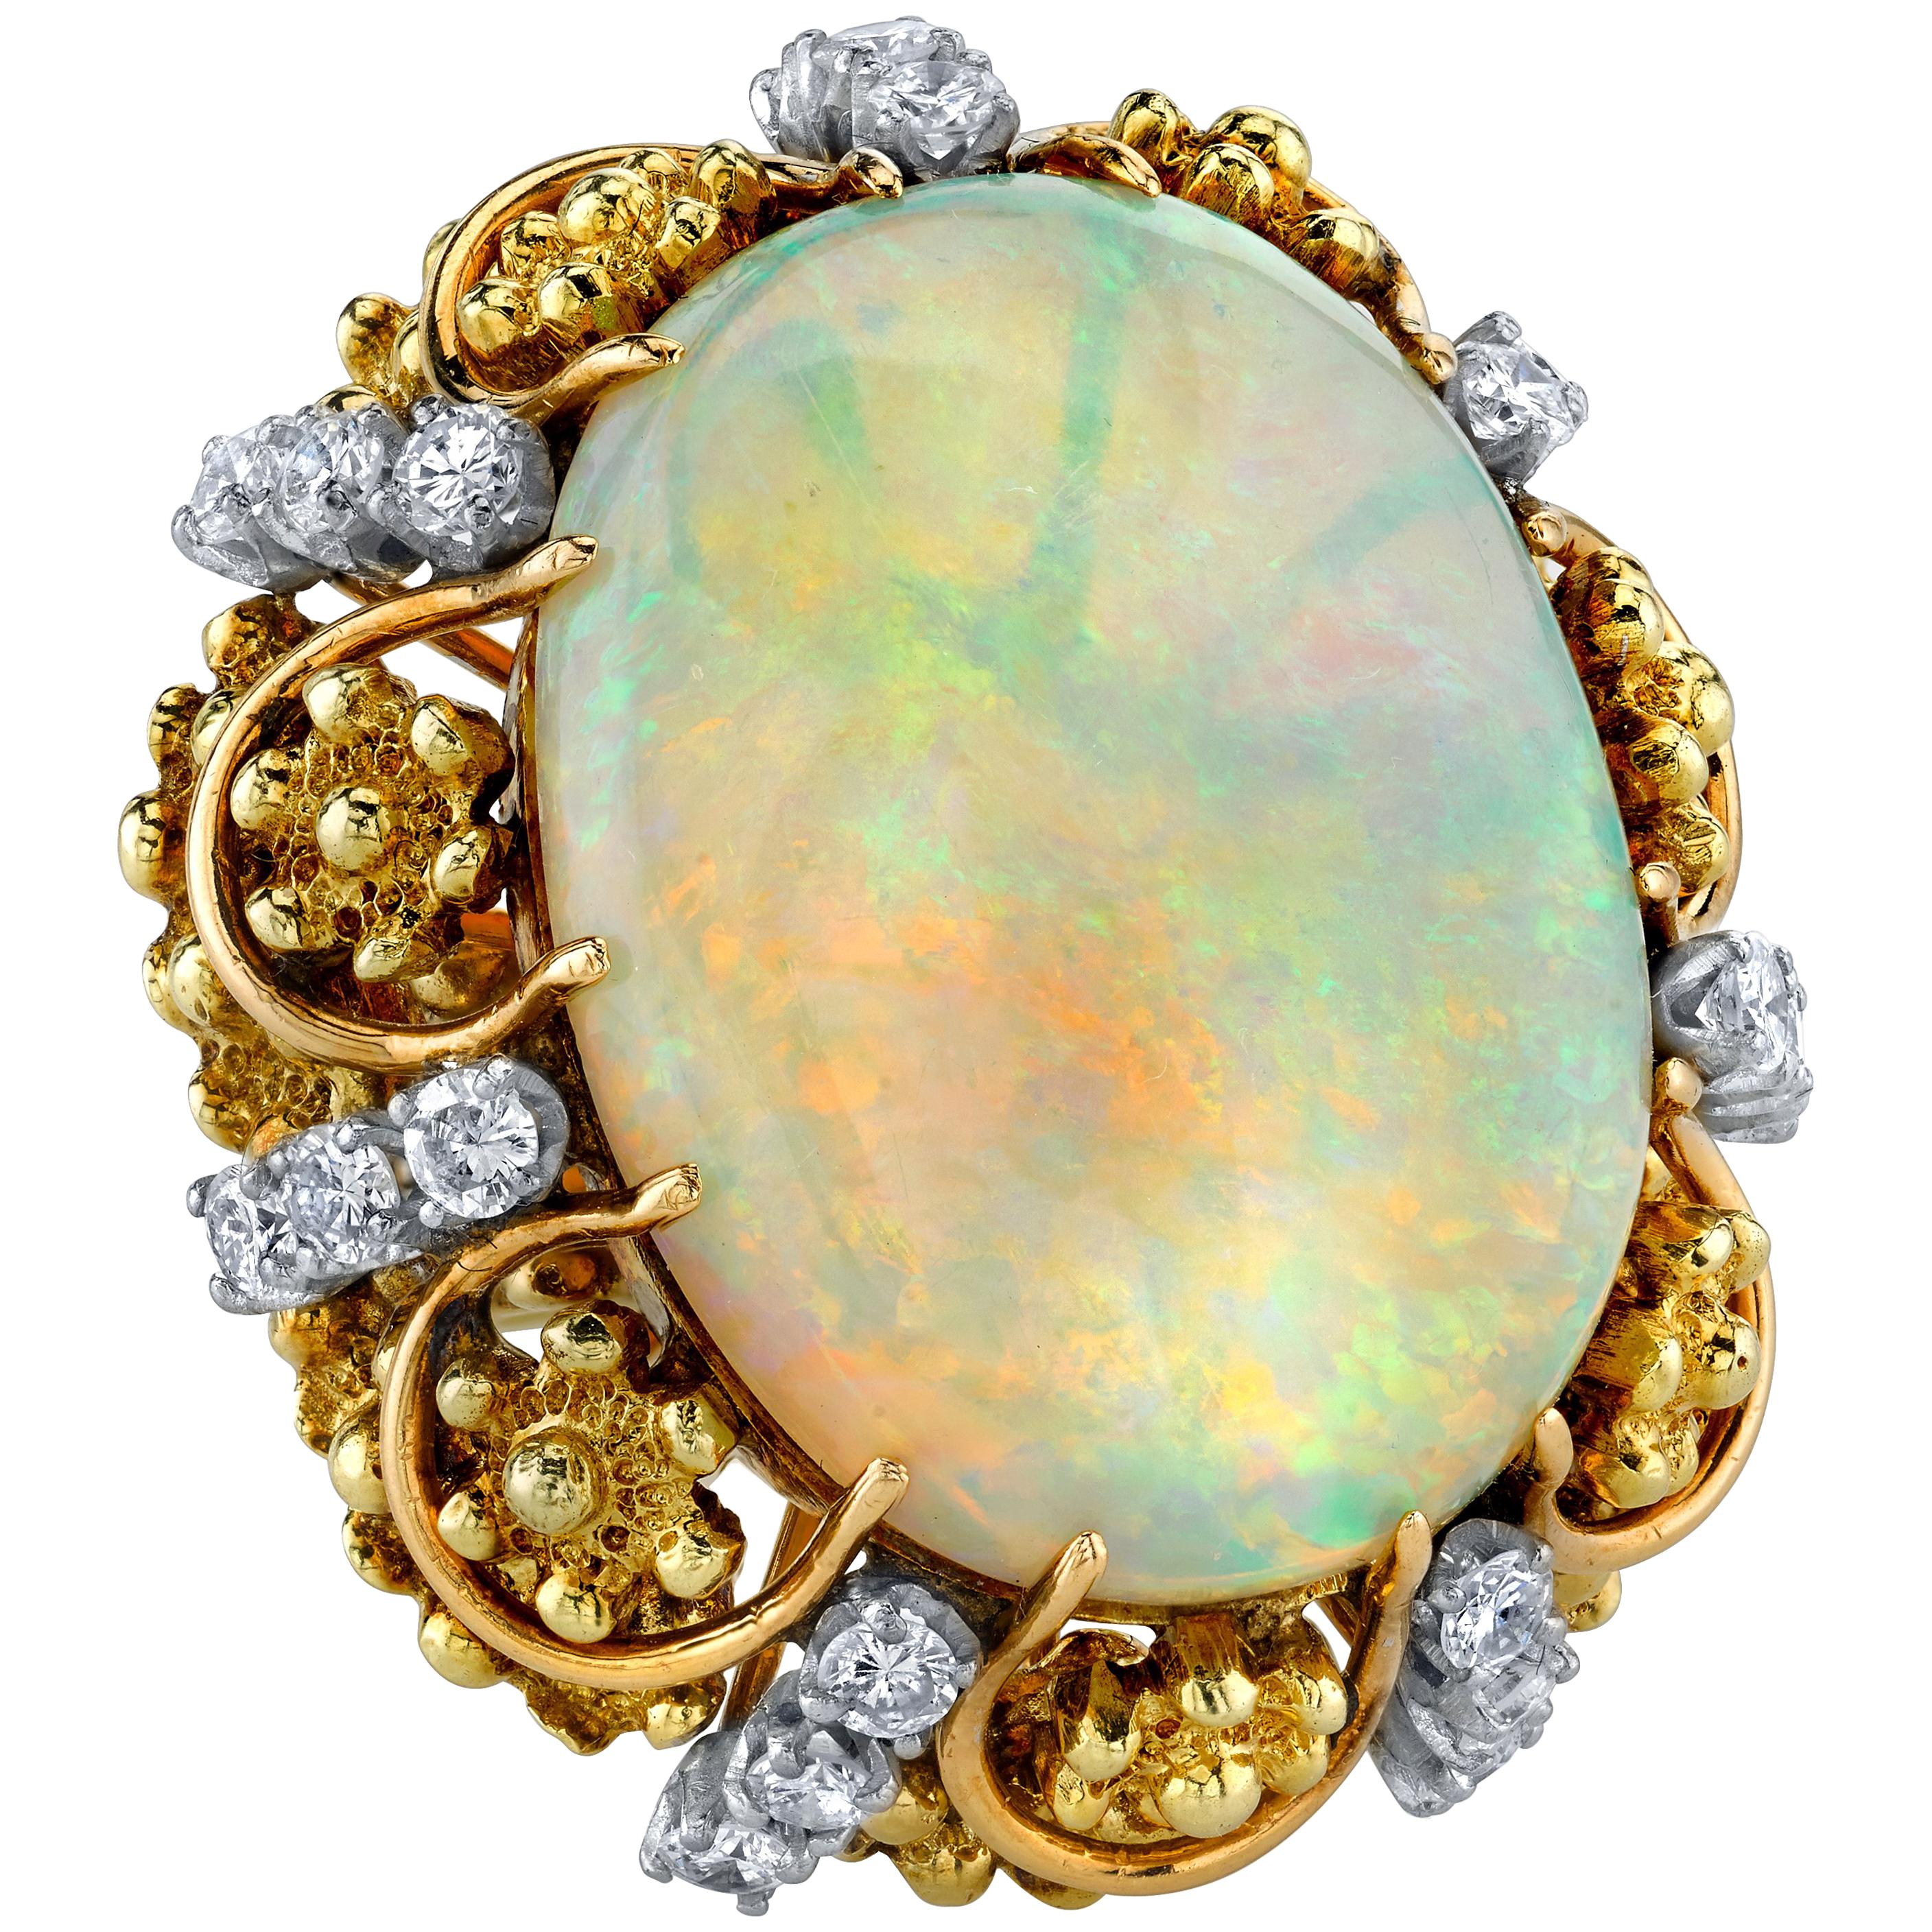 22.12 ct. Australian Opal and Diamond 14k Yellow Gold Cocktail Ring